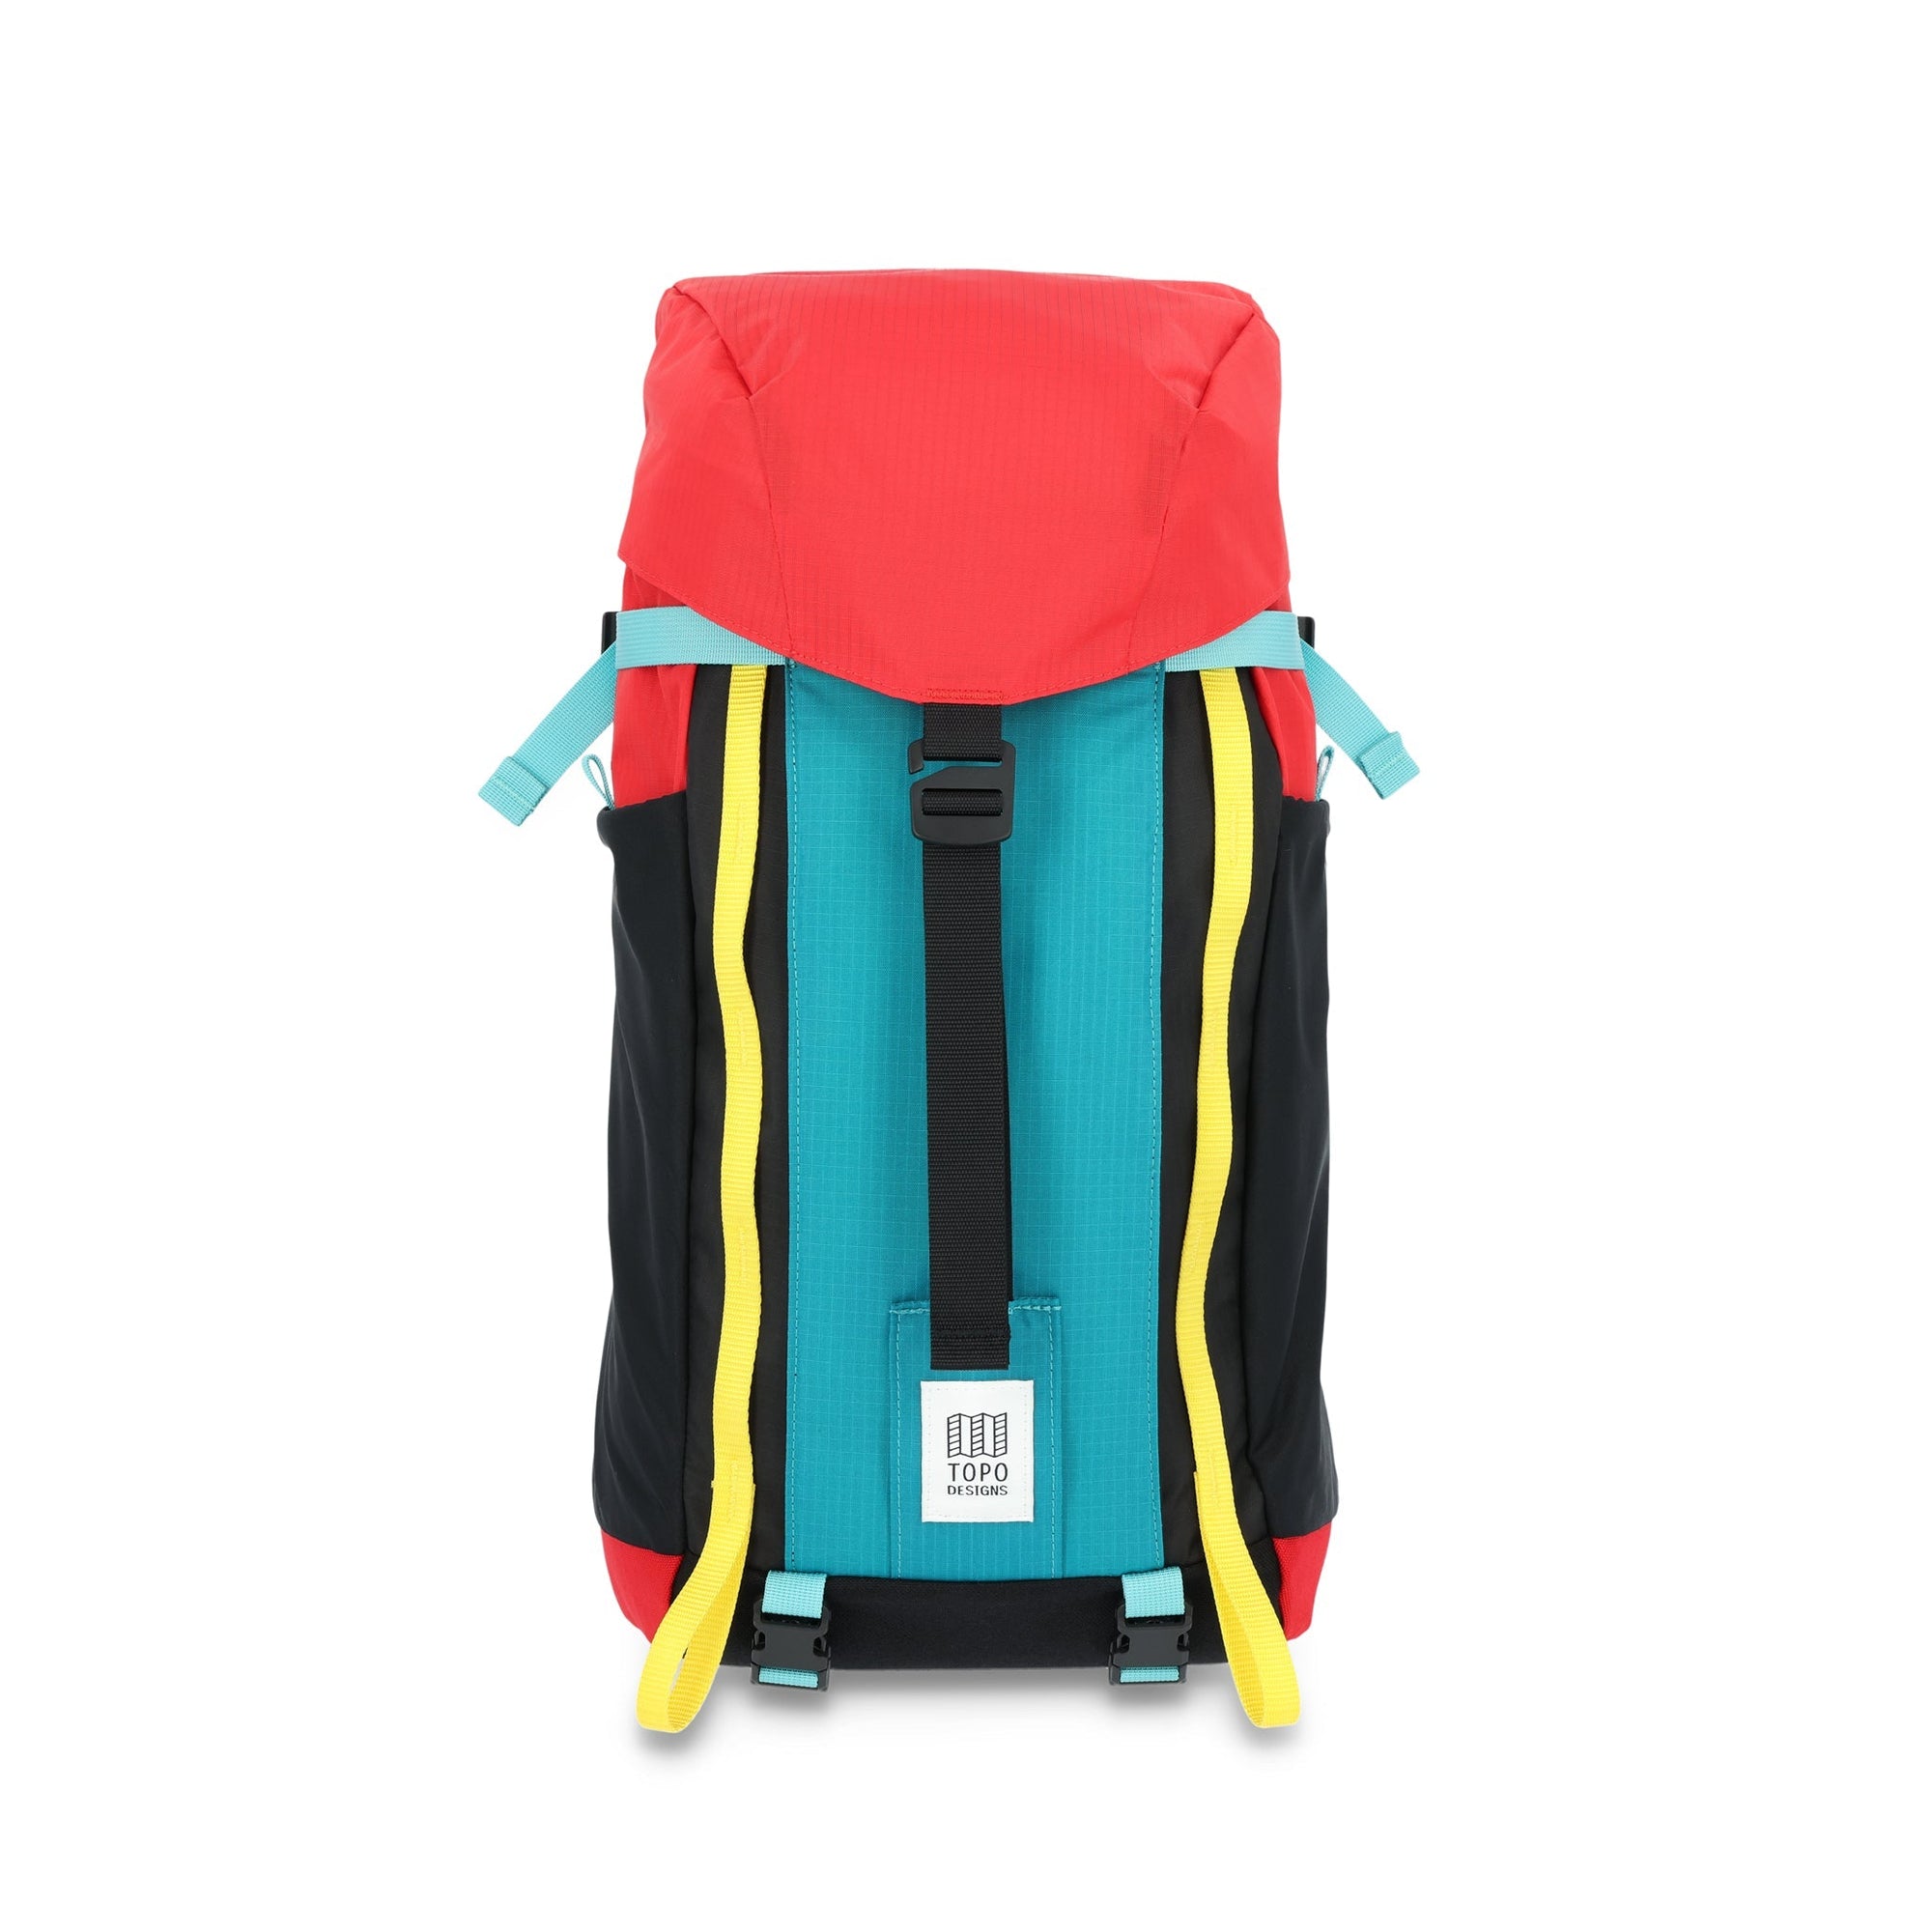 Topo Designs Mountain Pack 16L Red/Turquoise bags Topo Designs 